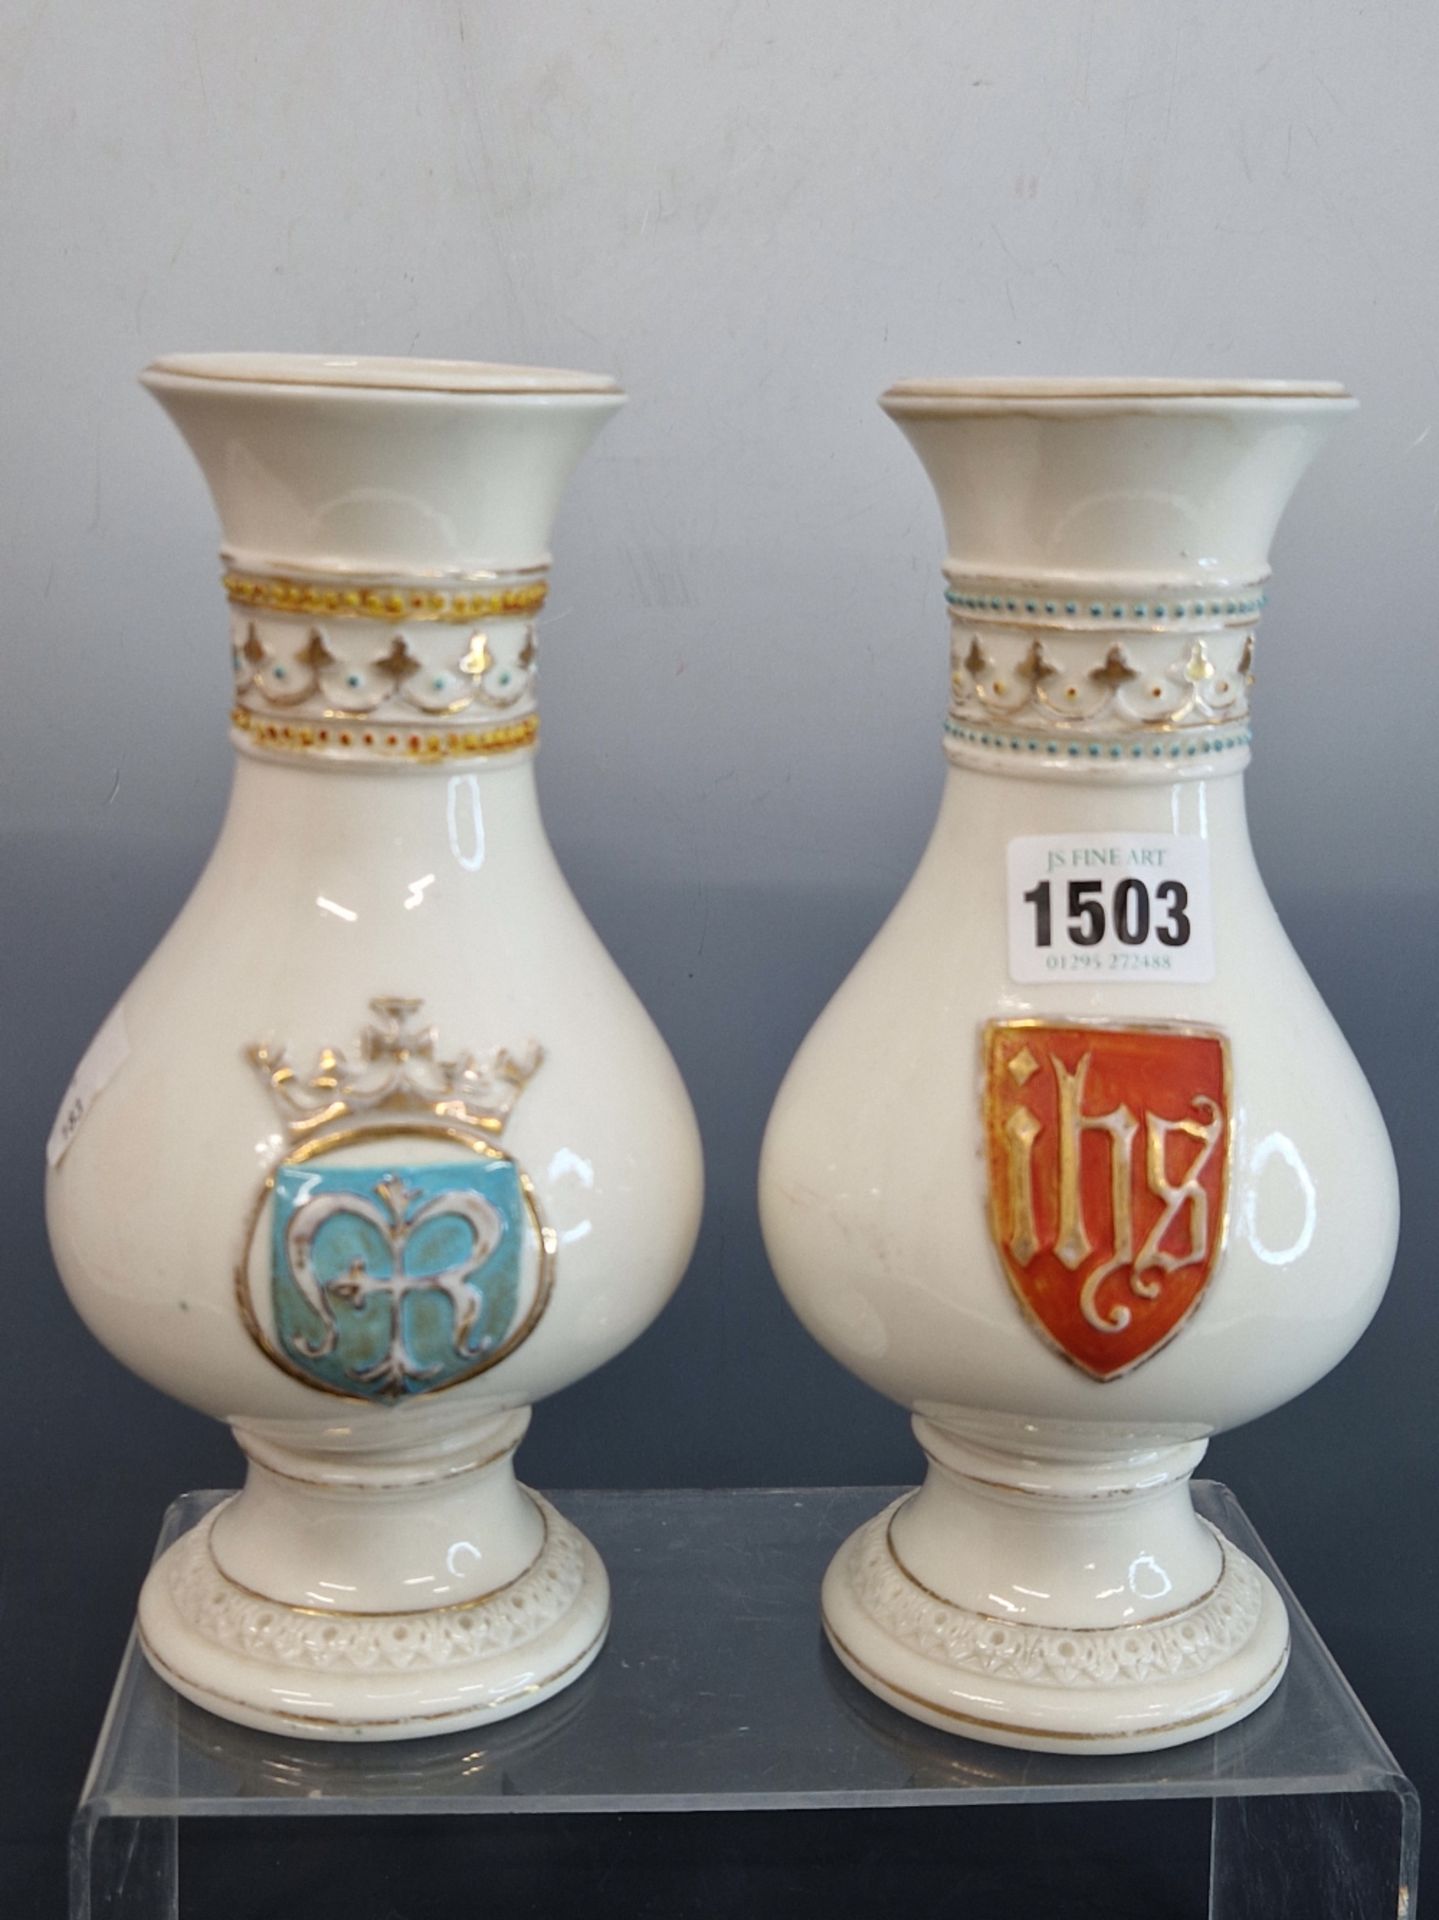 ATTRIBUTED TO A DESIGN BY A W N PUGIN, A PAIR OF GLAZED PARIAN BALUSTER ALTAR VASES. H 21cms.